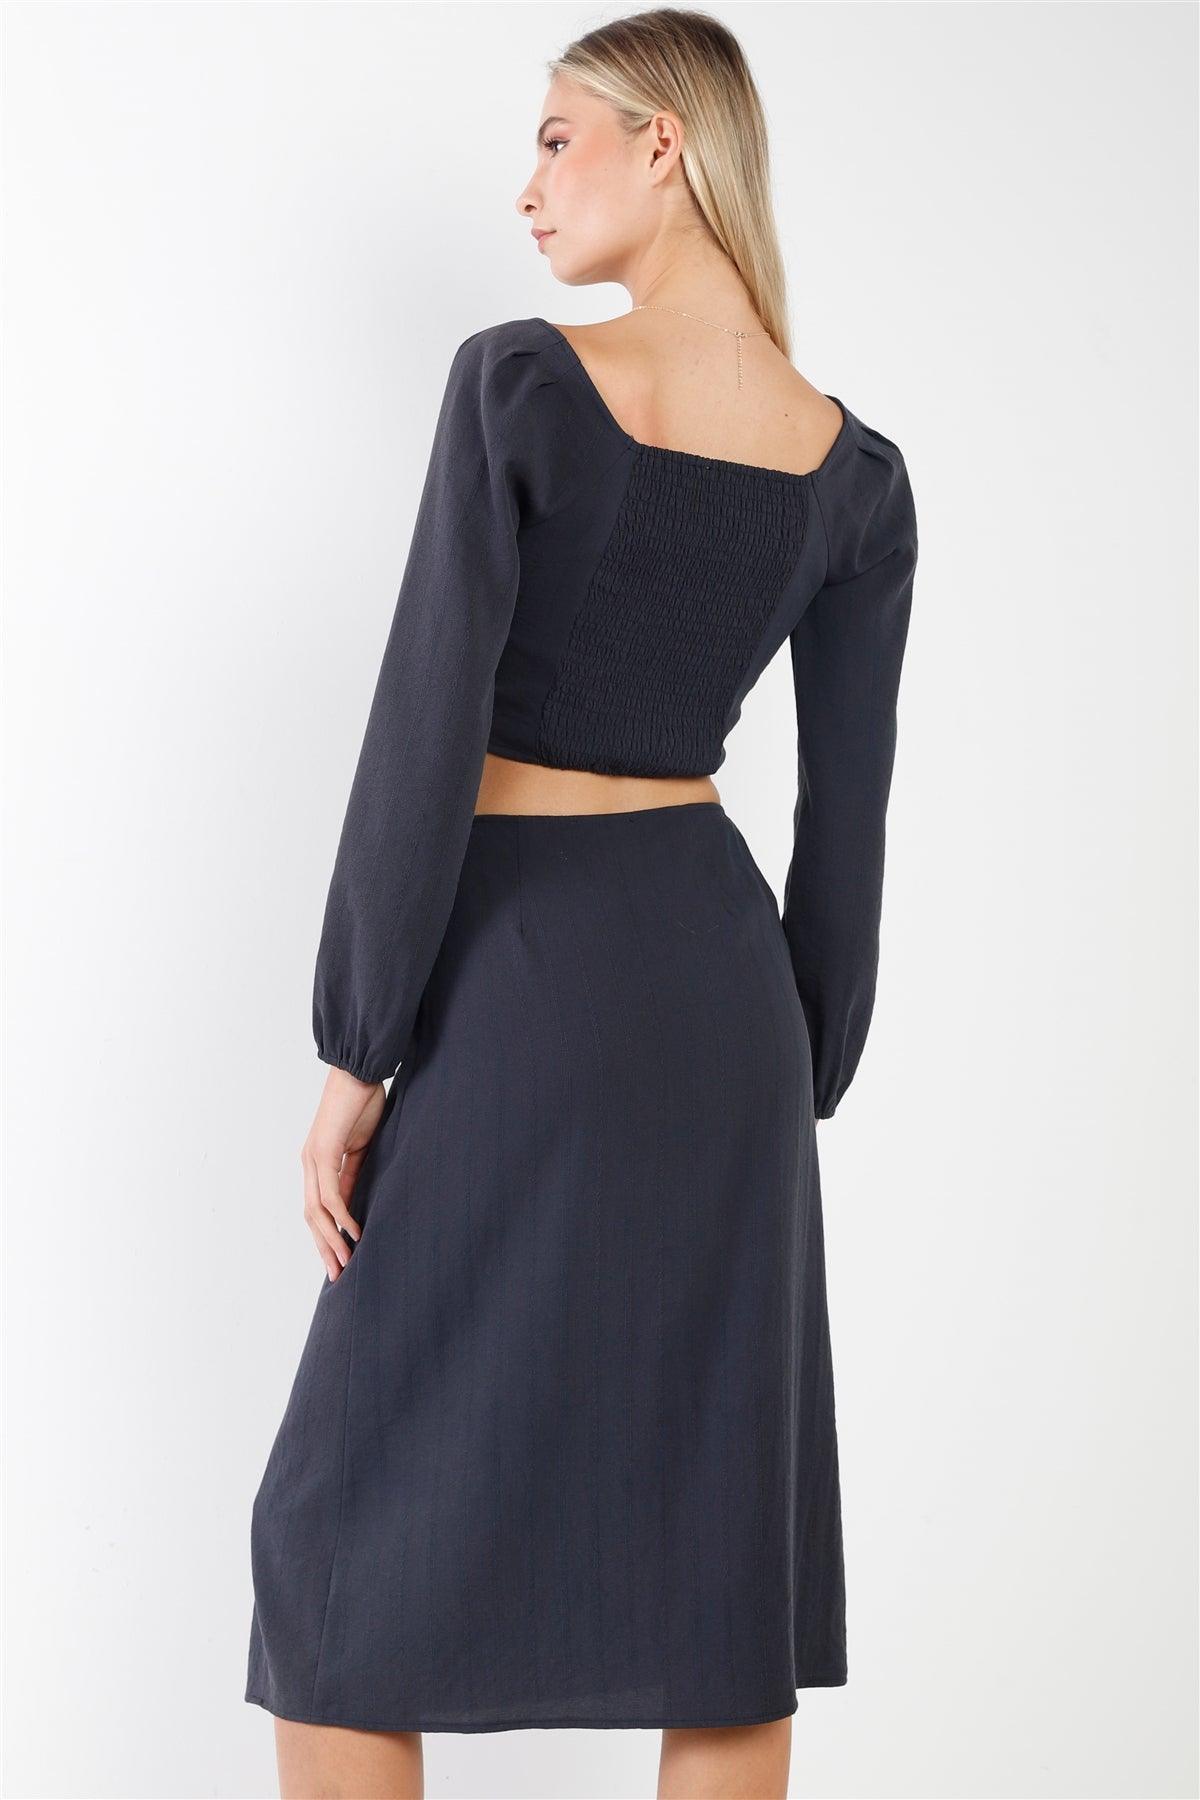 Navy Side Button Square Neck Crop Top & Midi Chic Skirt Set/2-2-2